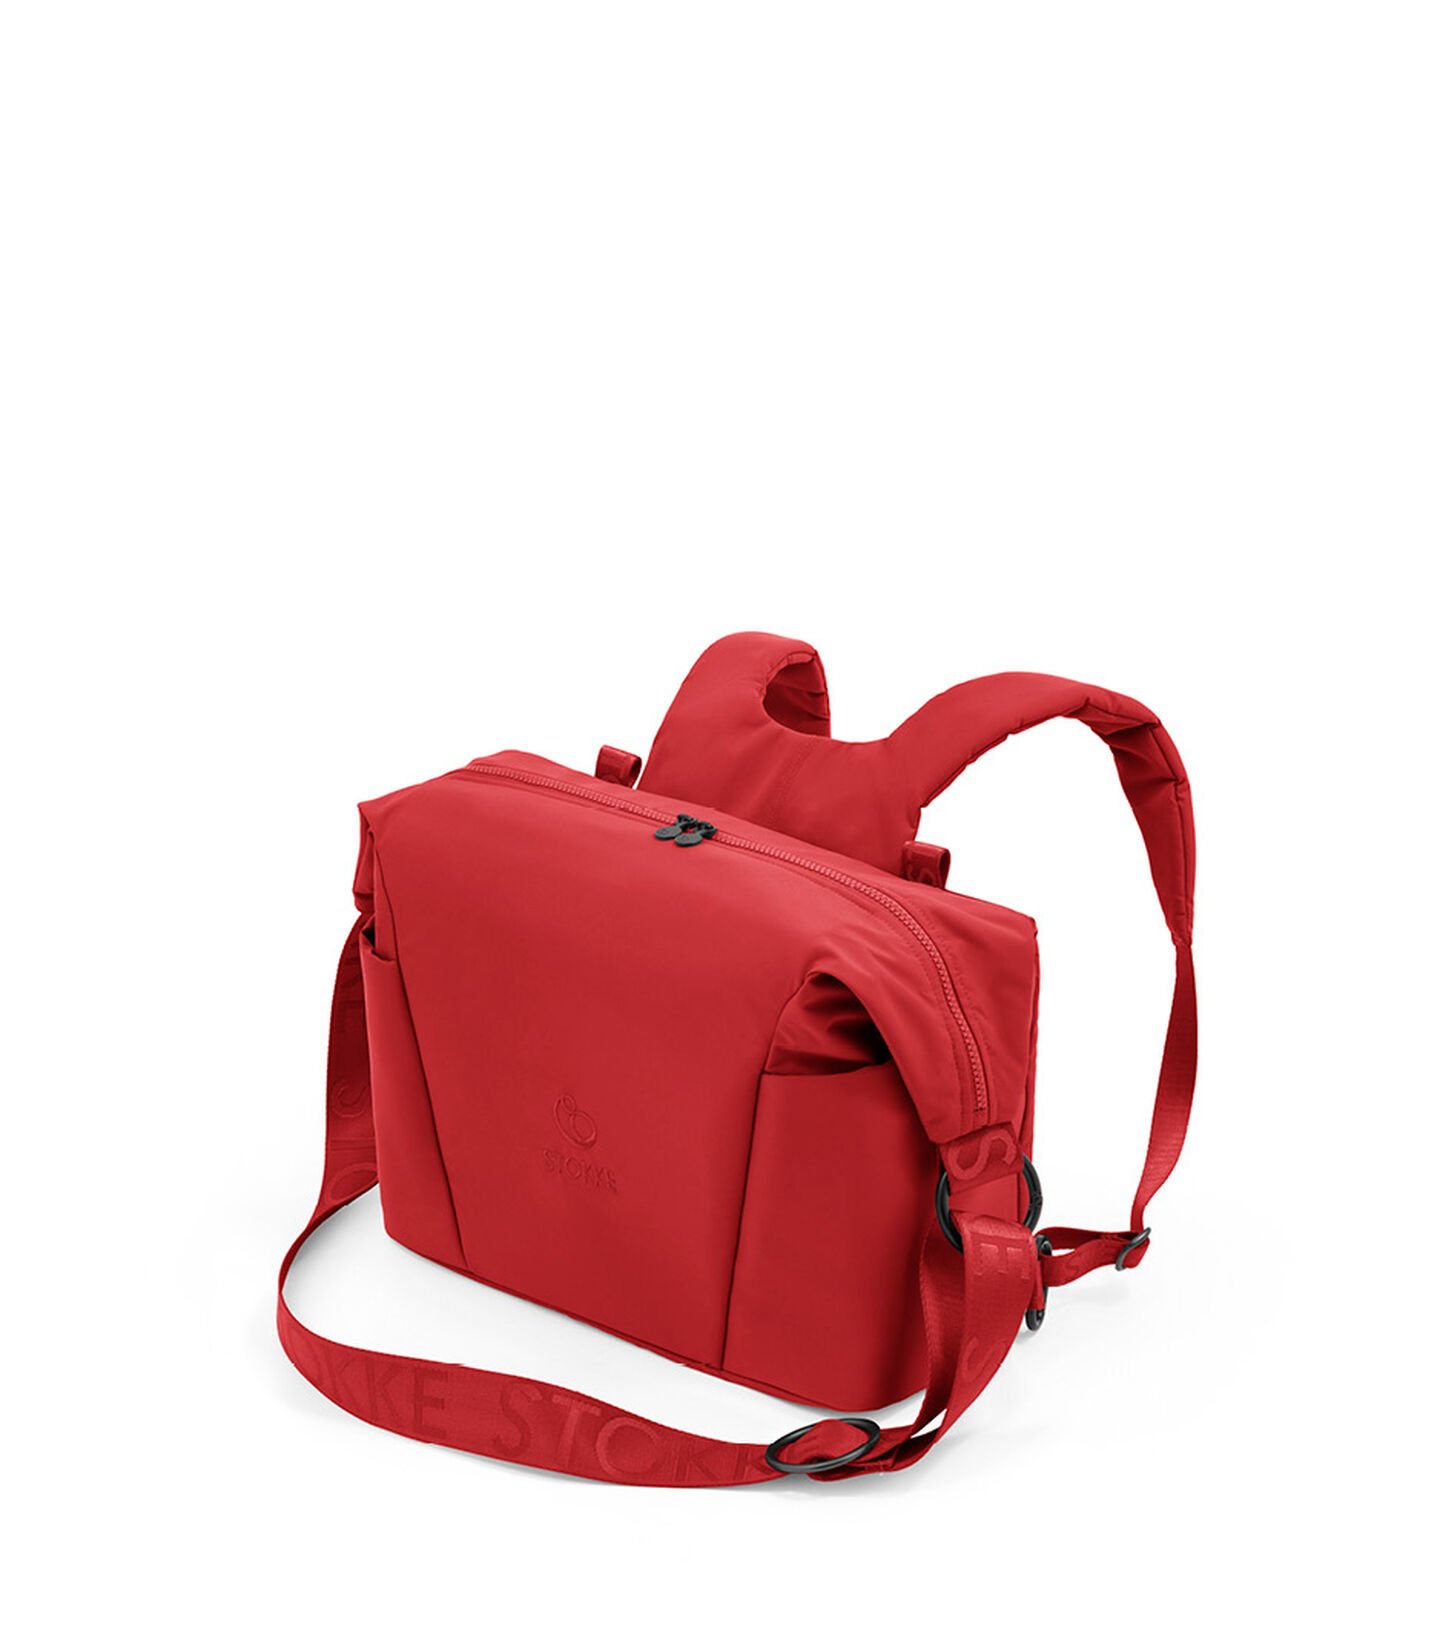 Stokke® Xplory® X Wickeltasche Ruby Red, Ruby Red, mainview view 1